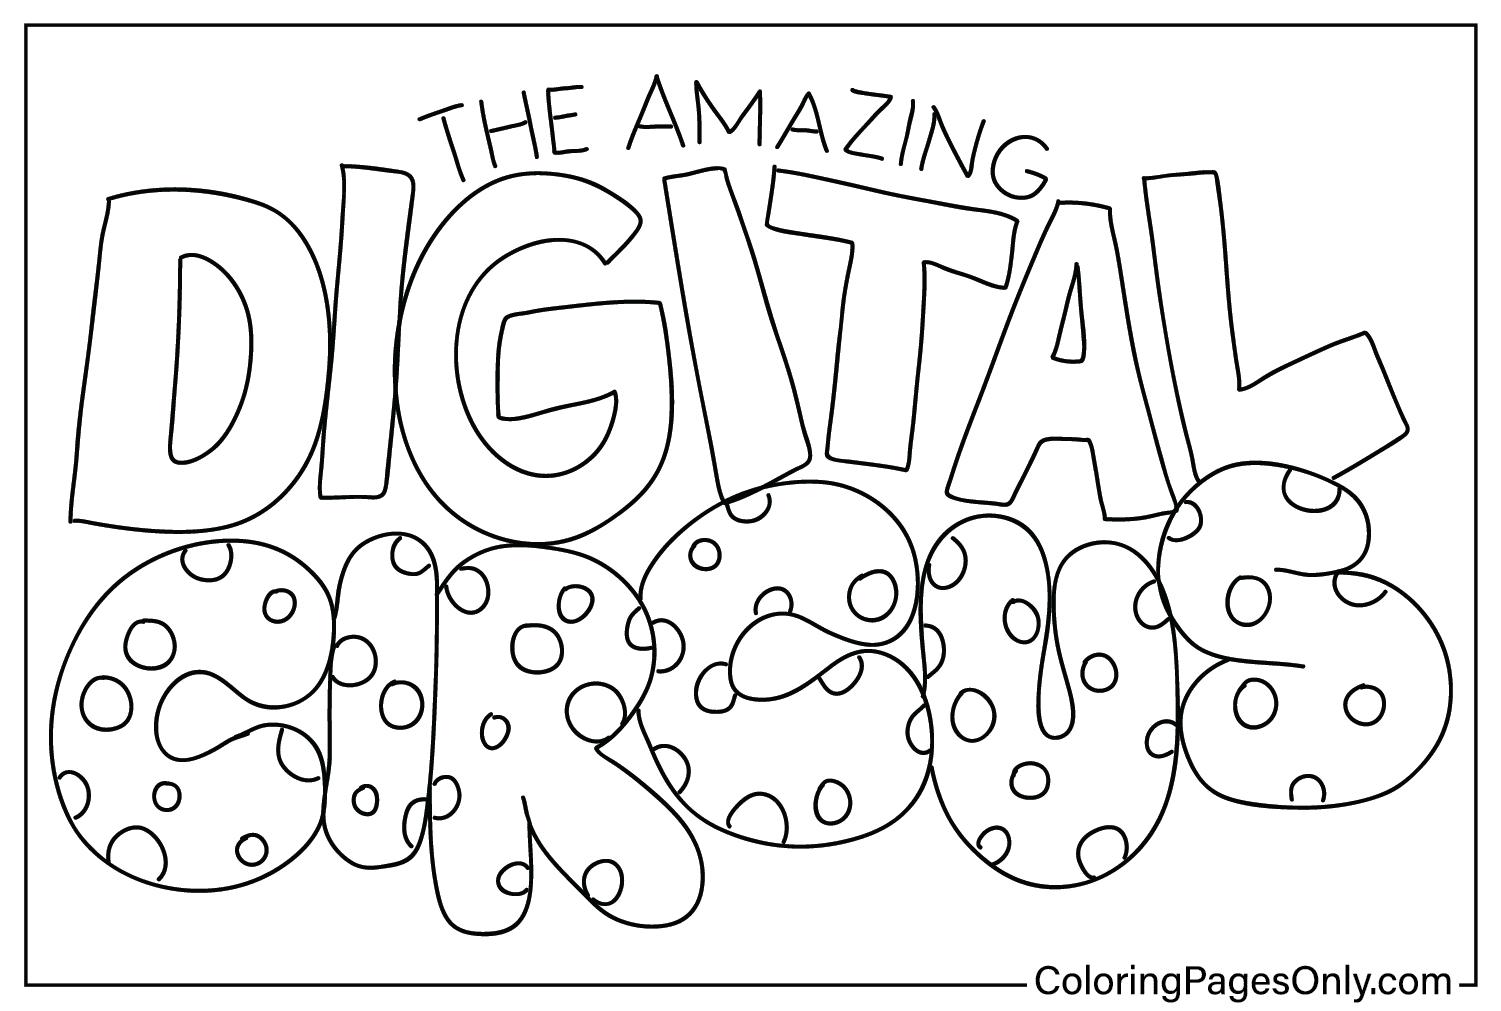 Logo The Amazing Digital Circus Coloring Page from The Amazing Digital Circus